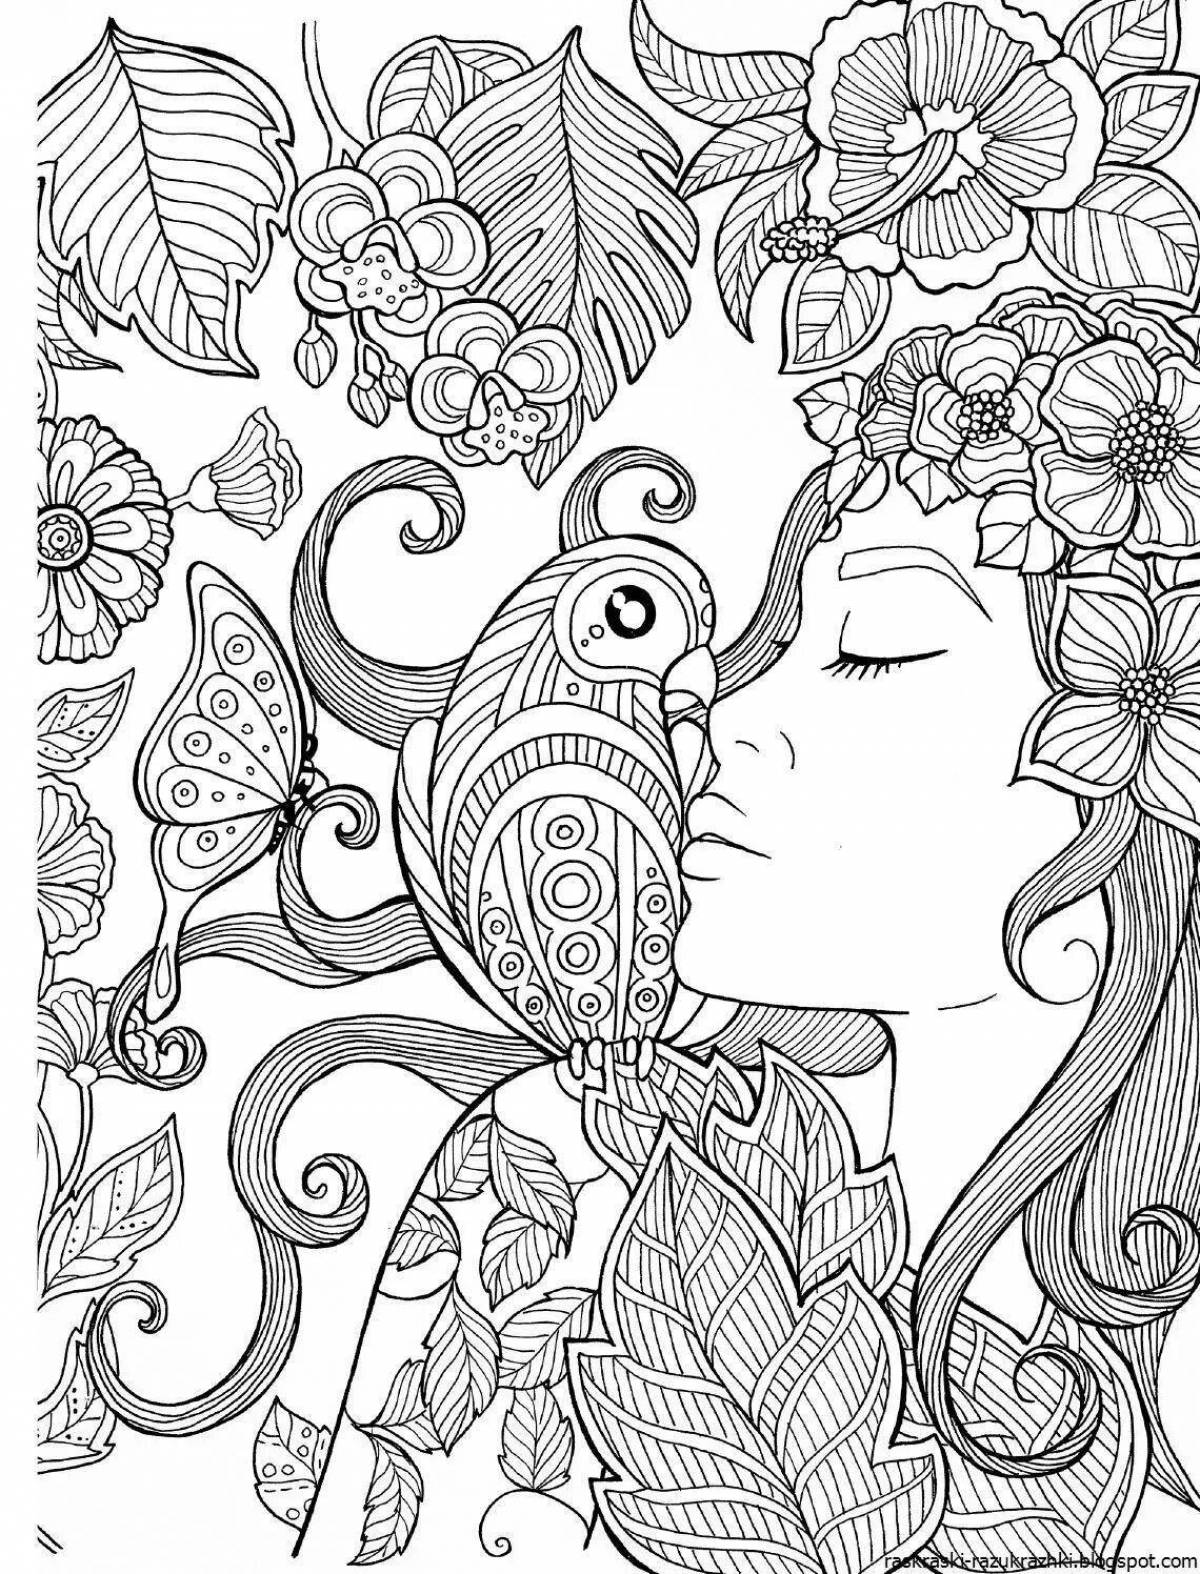 Serene antistress coloring pages for women